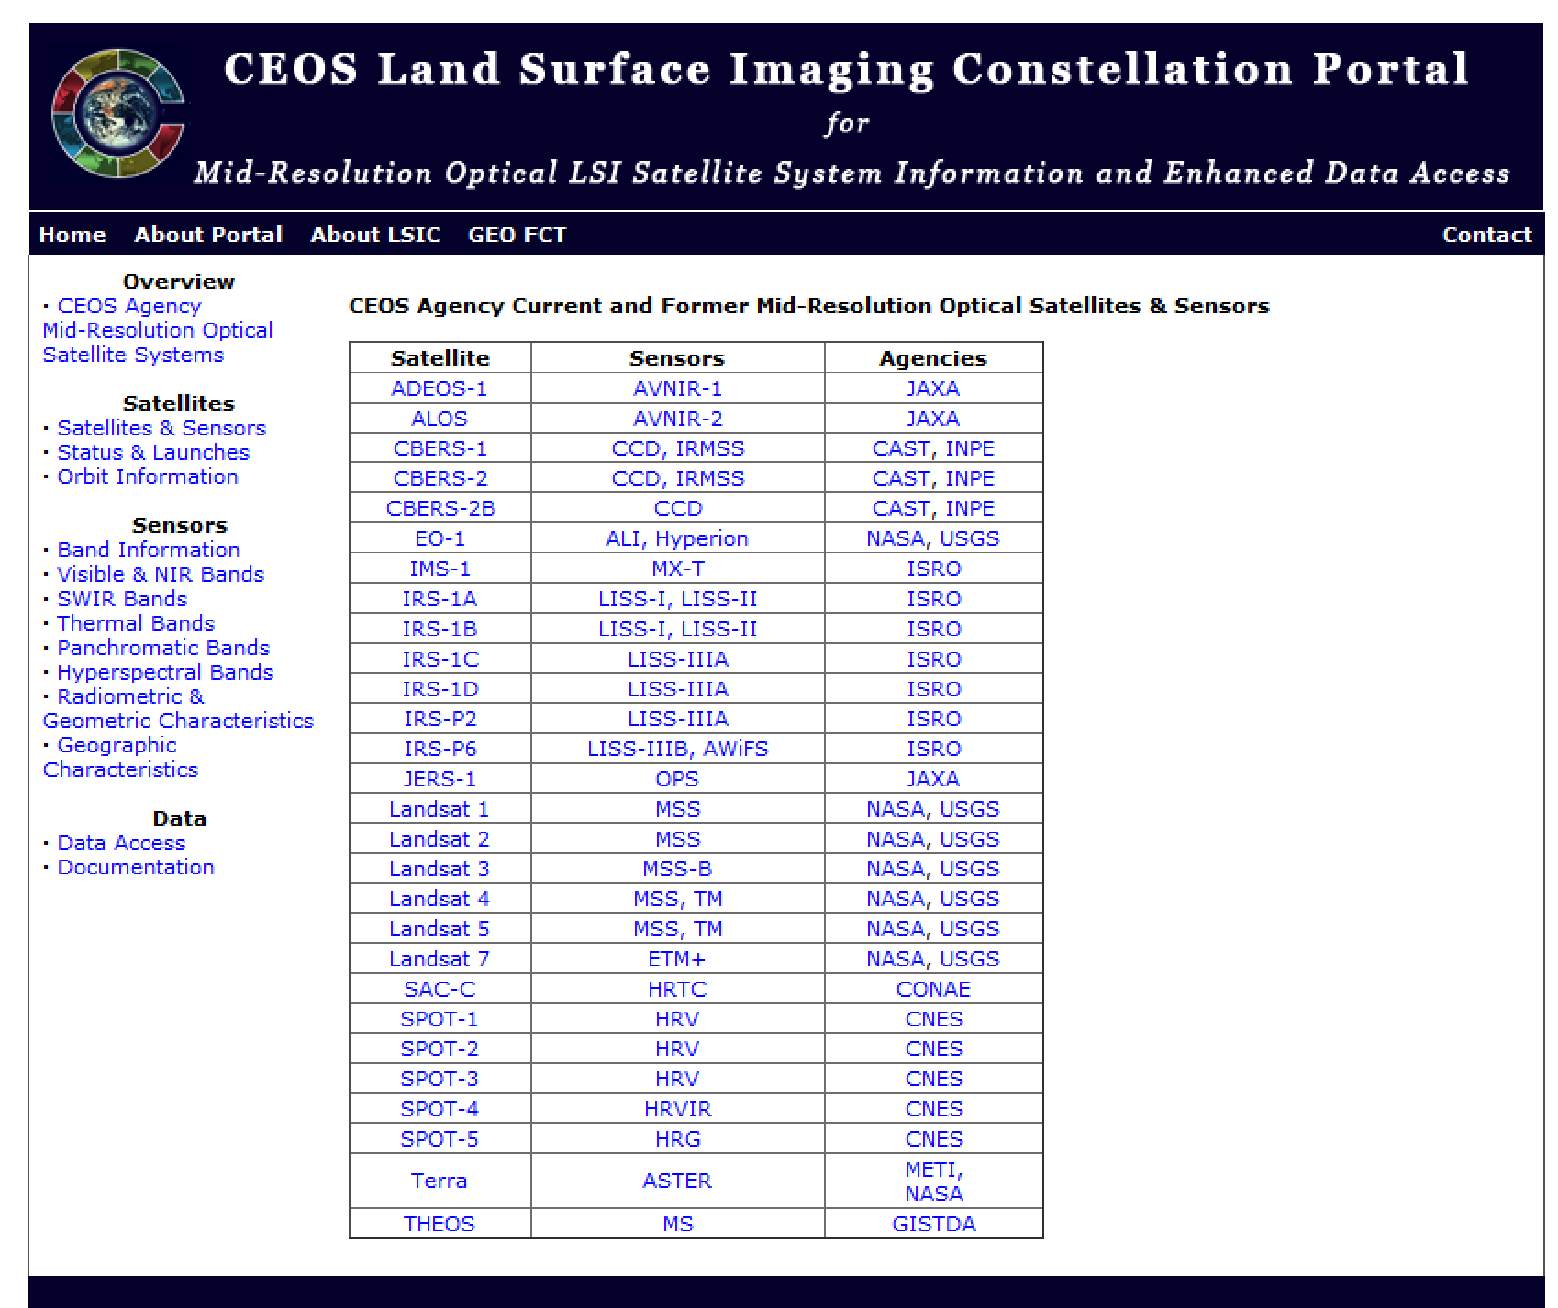 Figure 2. CEOS LSI Constellation Portal web page for additional information about mid-resolution, optical satellites and sensors.